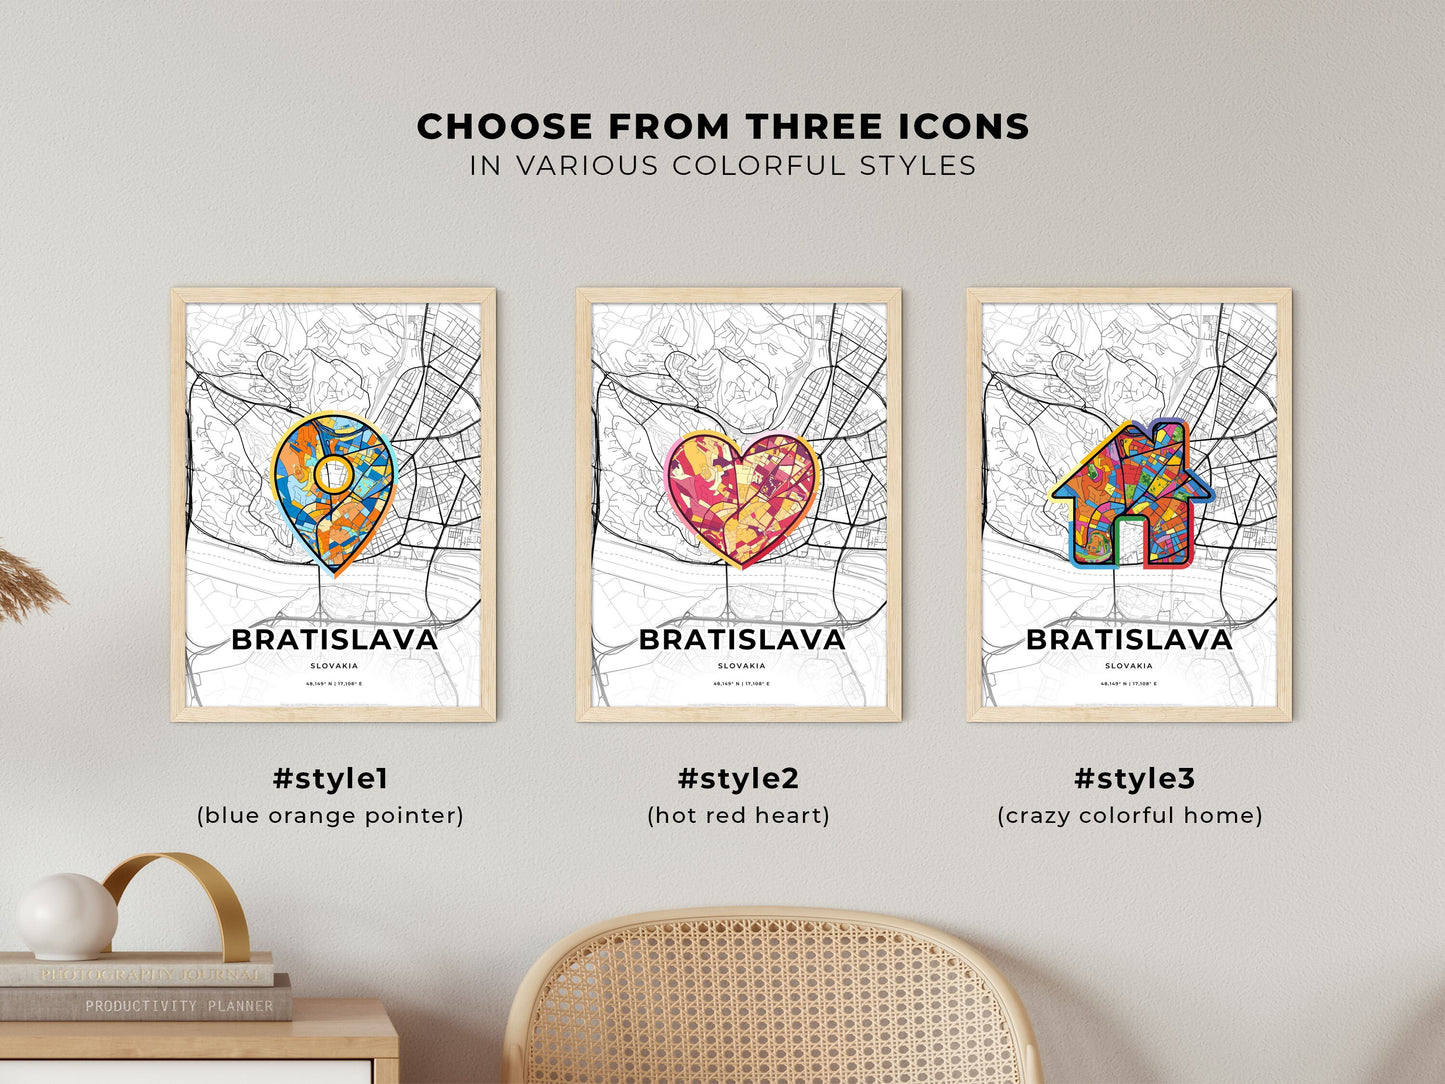 BRATISLAVA SLOVAKIA minimal art map with a colorful icon. Where it all began, Couple map gift.